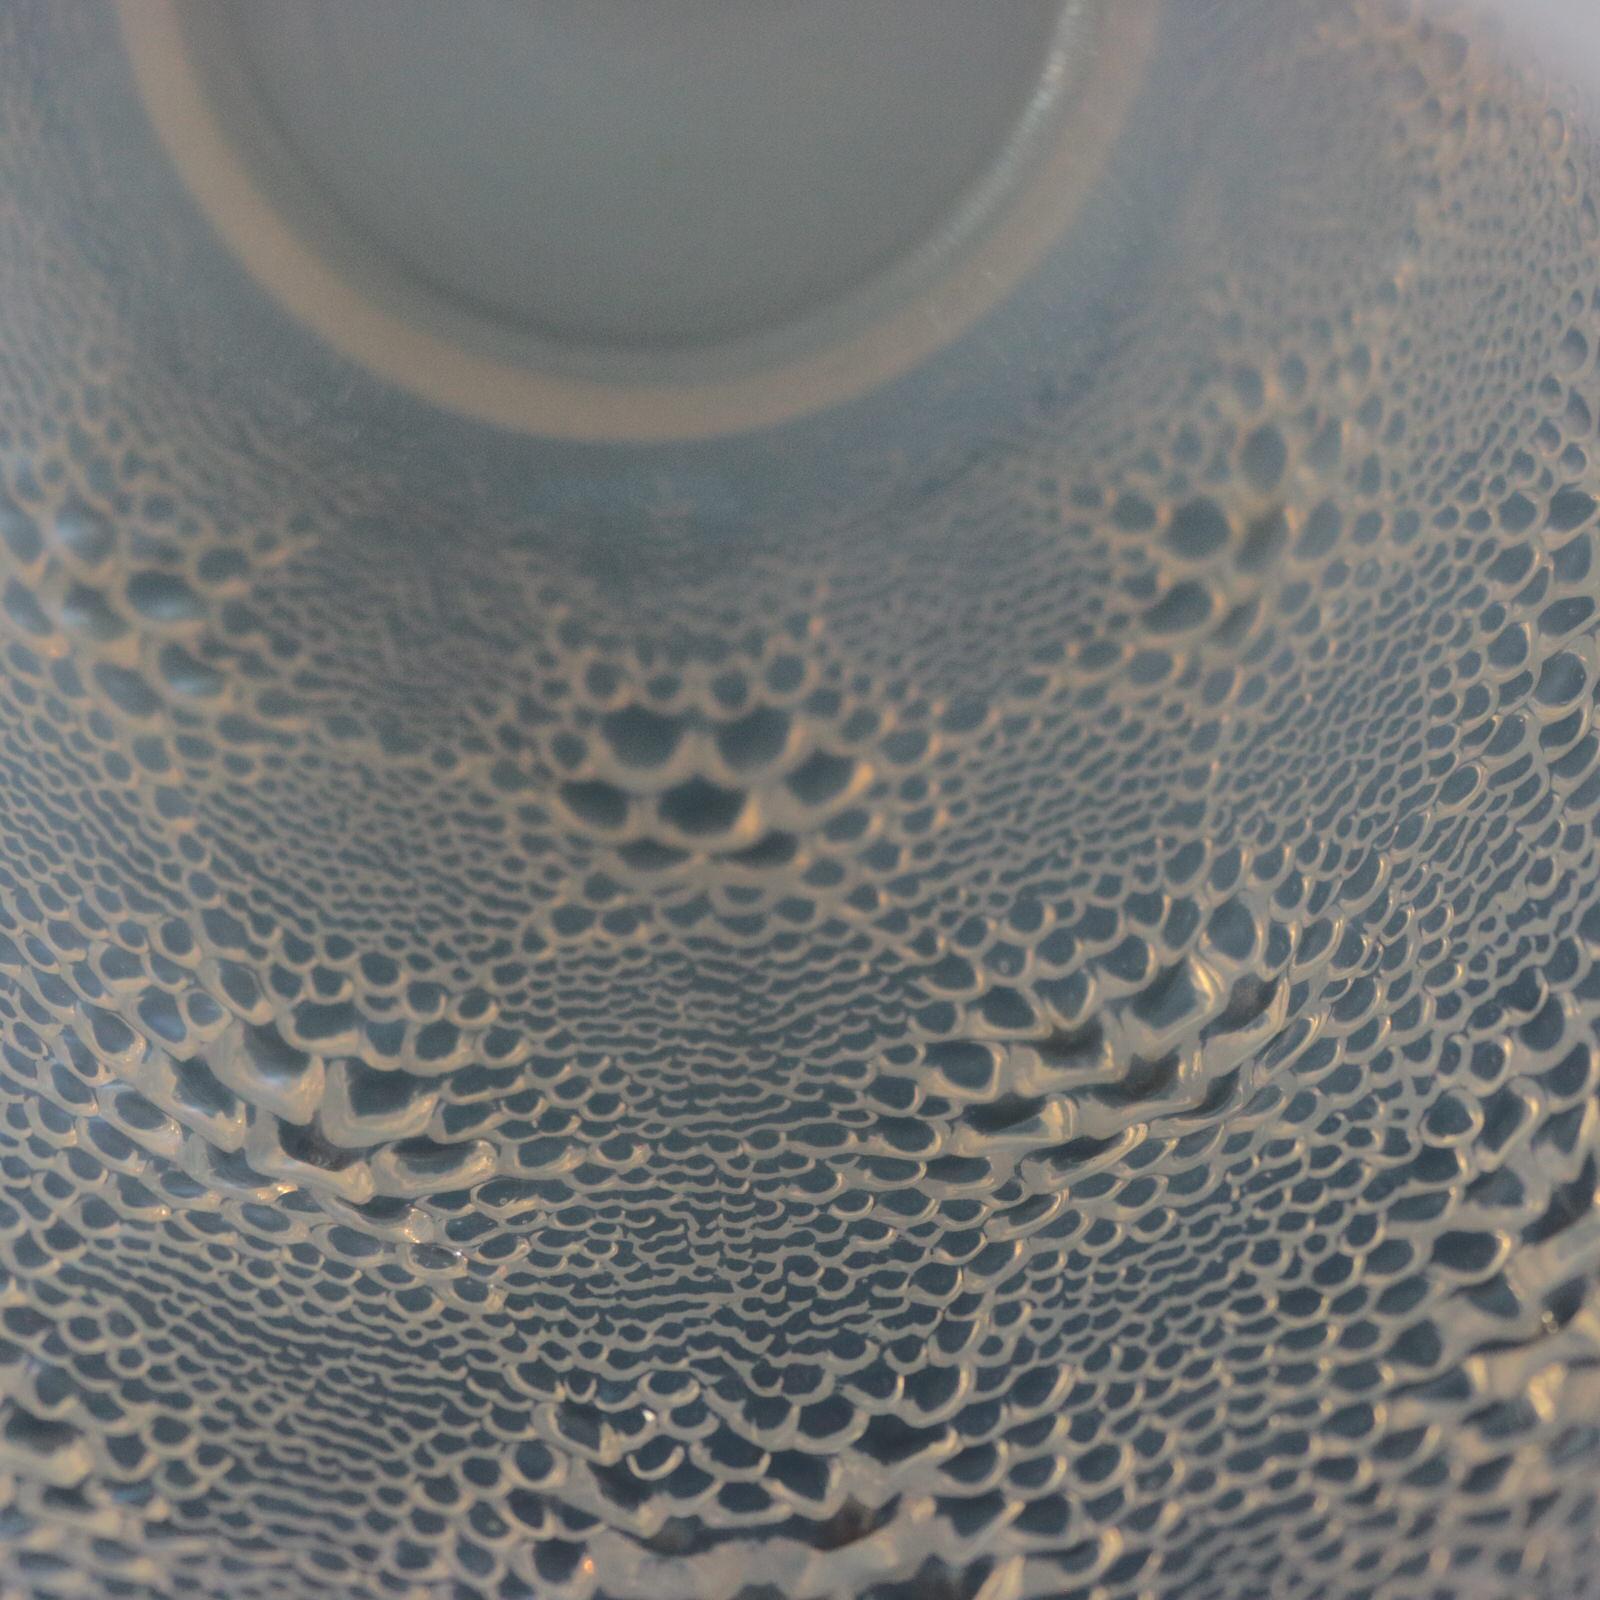 Mid-20th Century Rene Lalique Opalescent Glass 'Davos' Vase